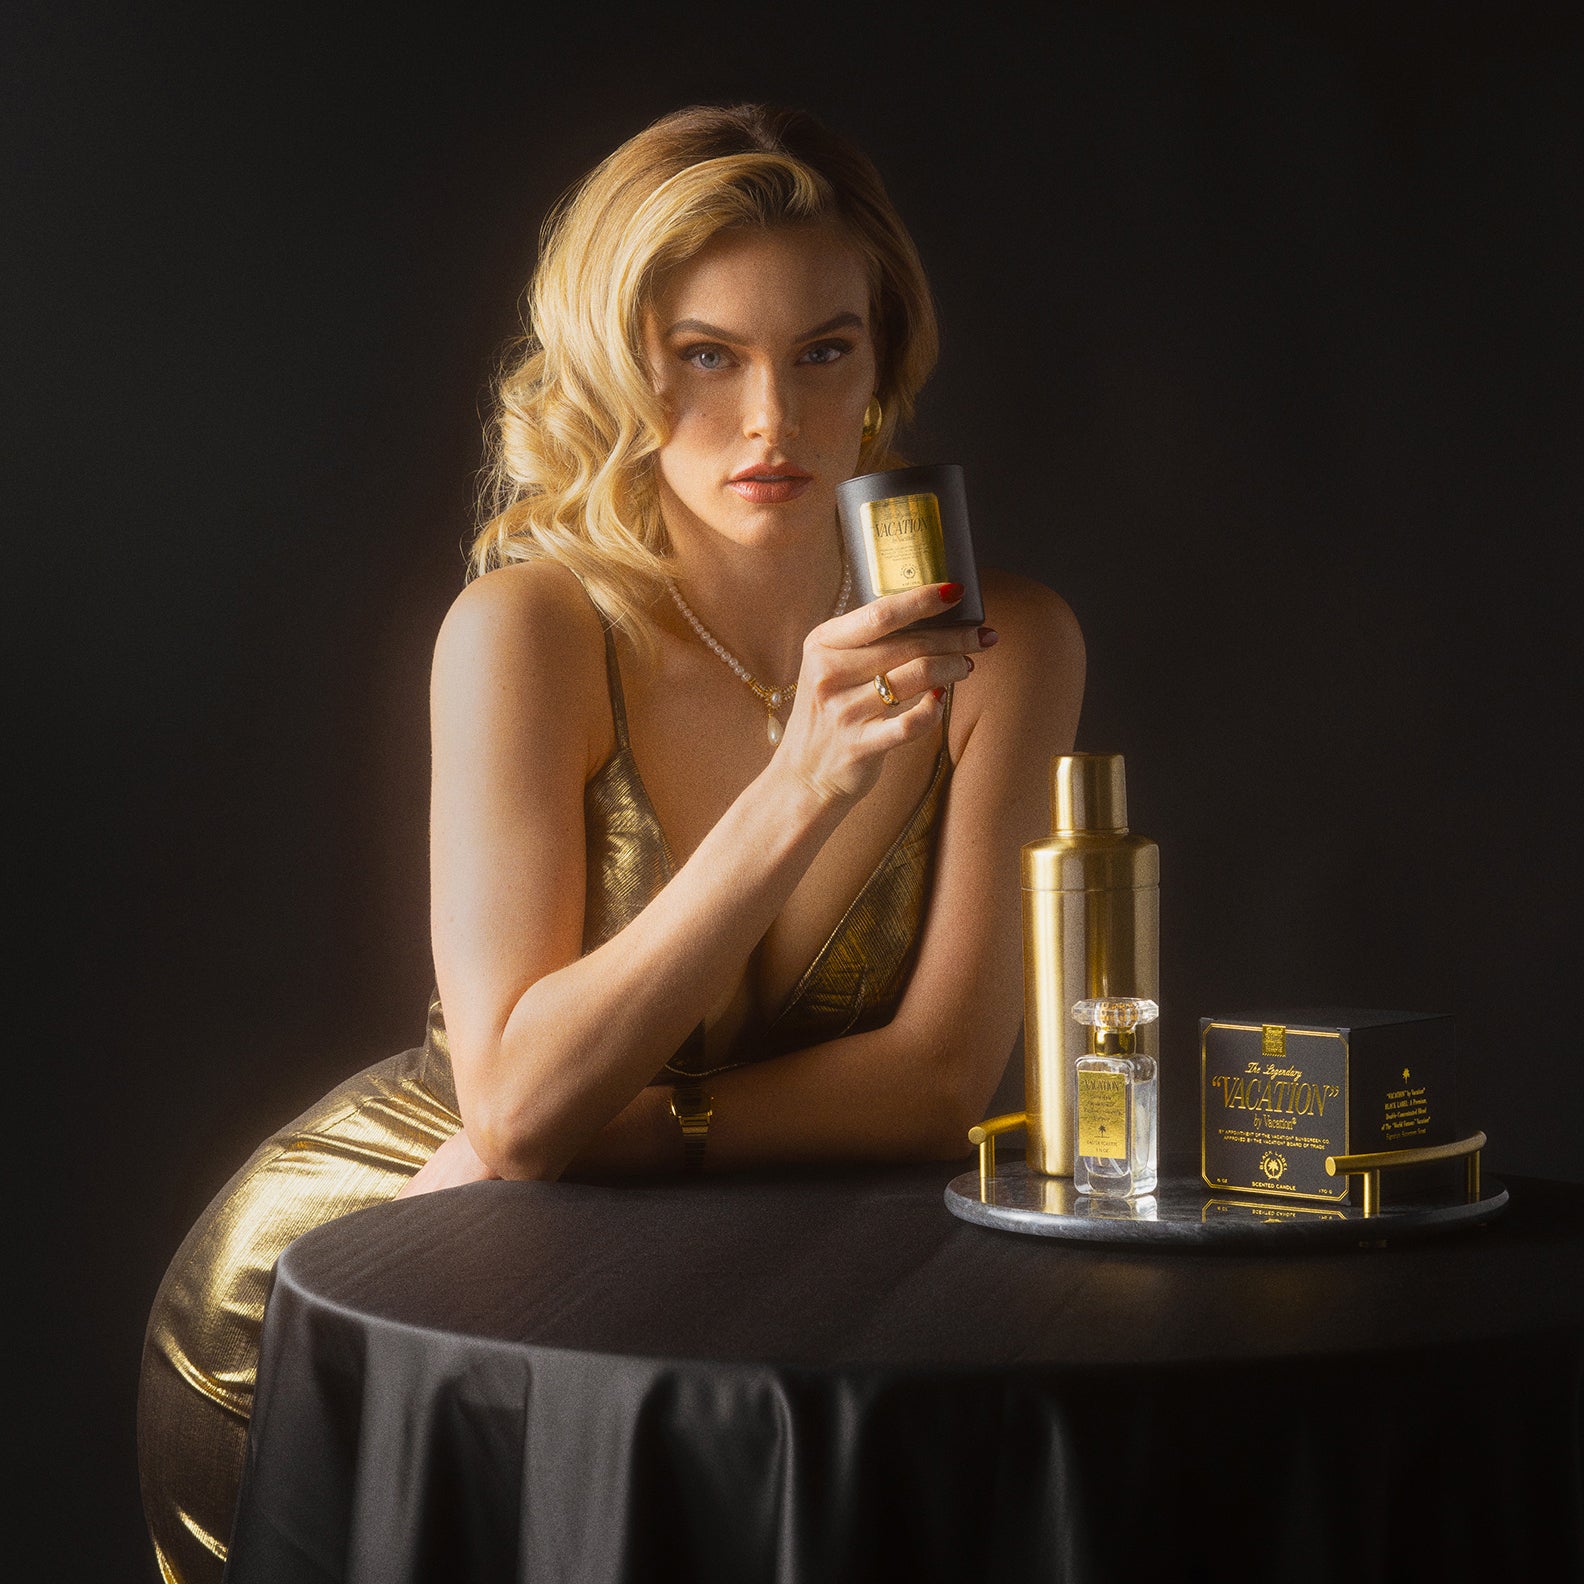 Vacation Black Label Candle and Model